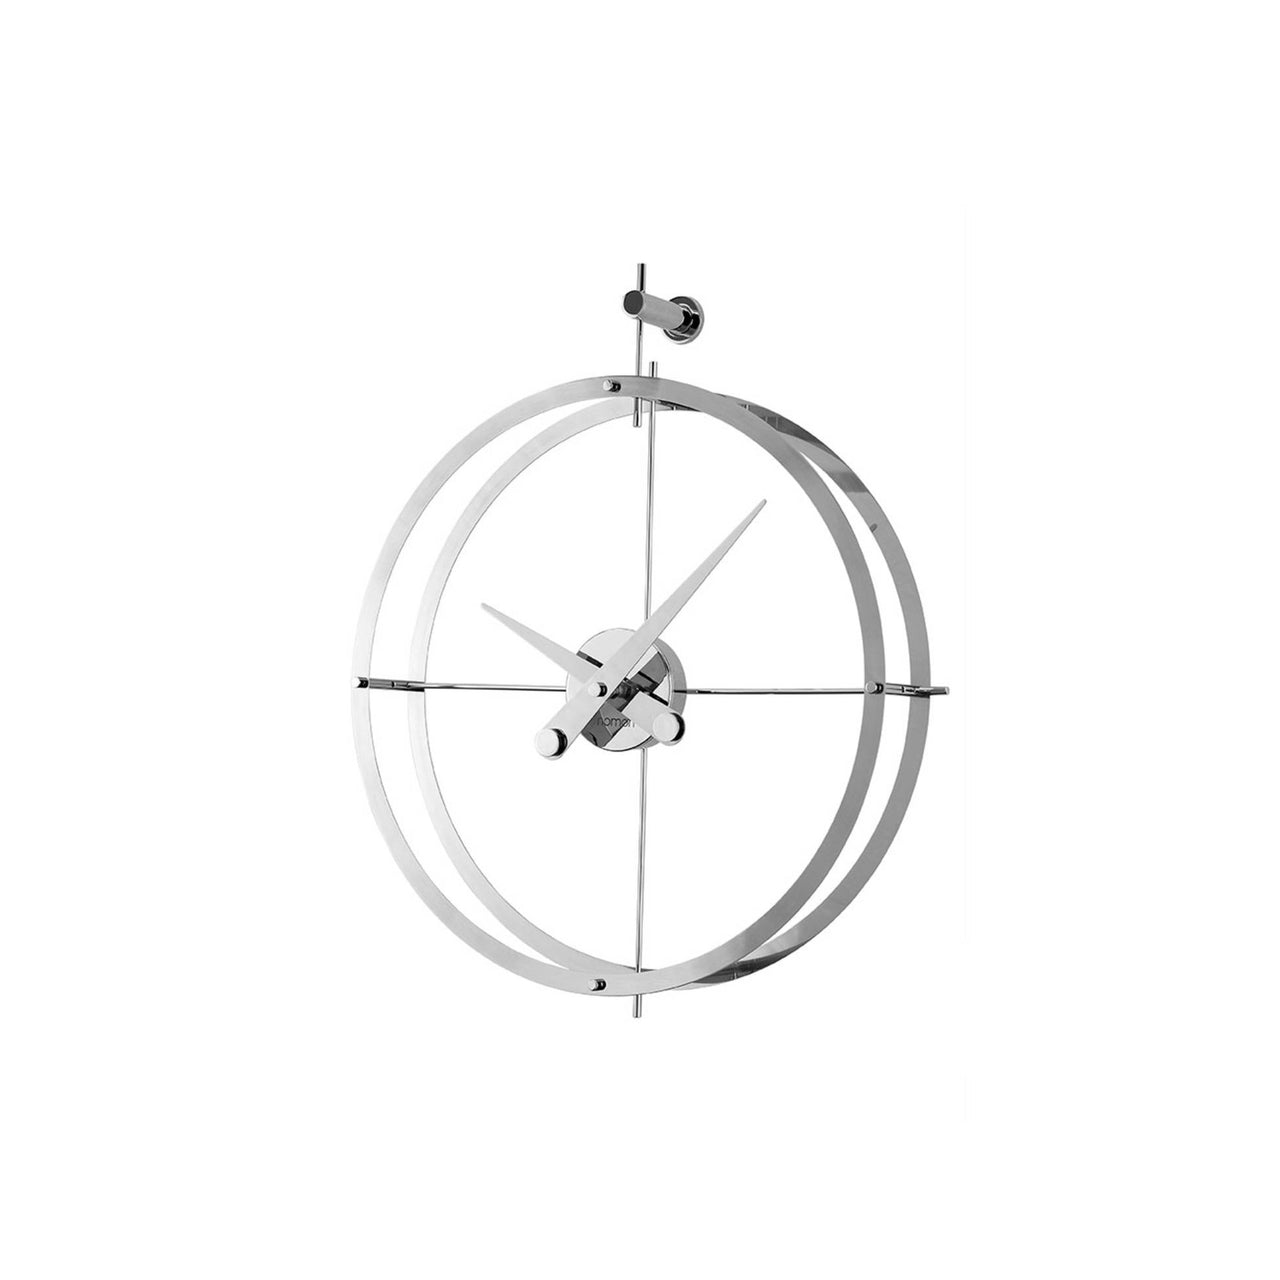 Dos Puntos Wall Clock: Stainless Steel + Chromed Brass